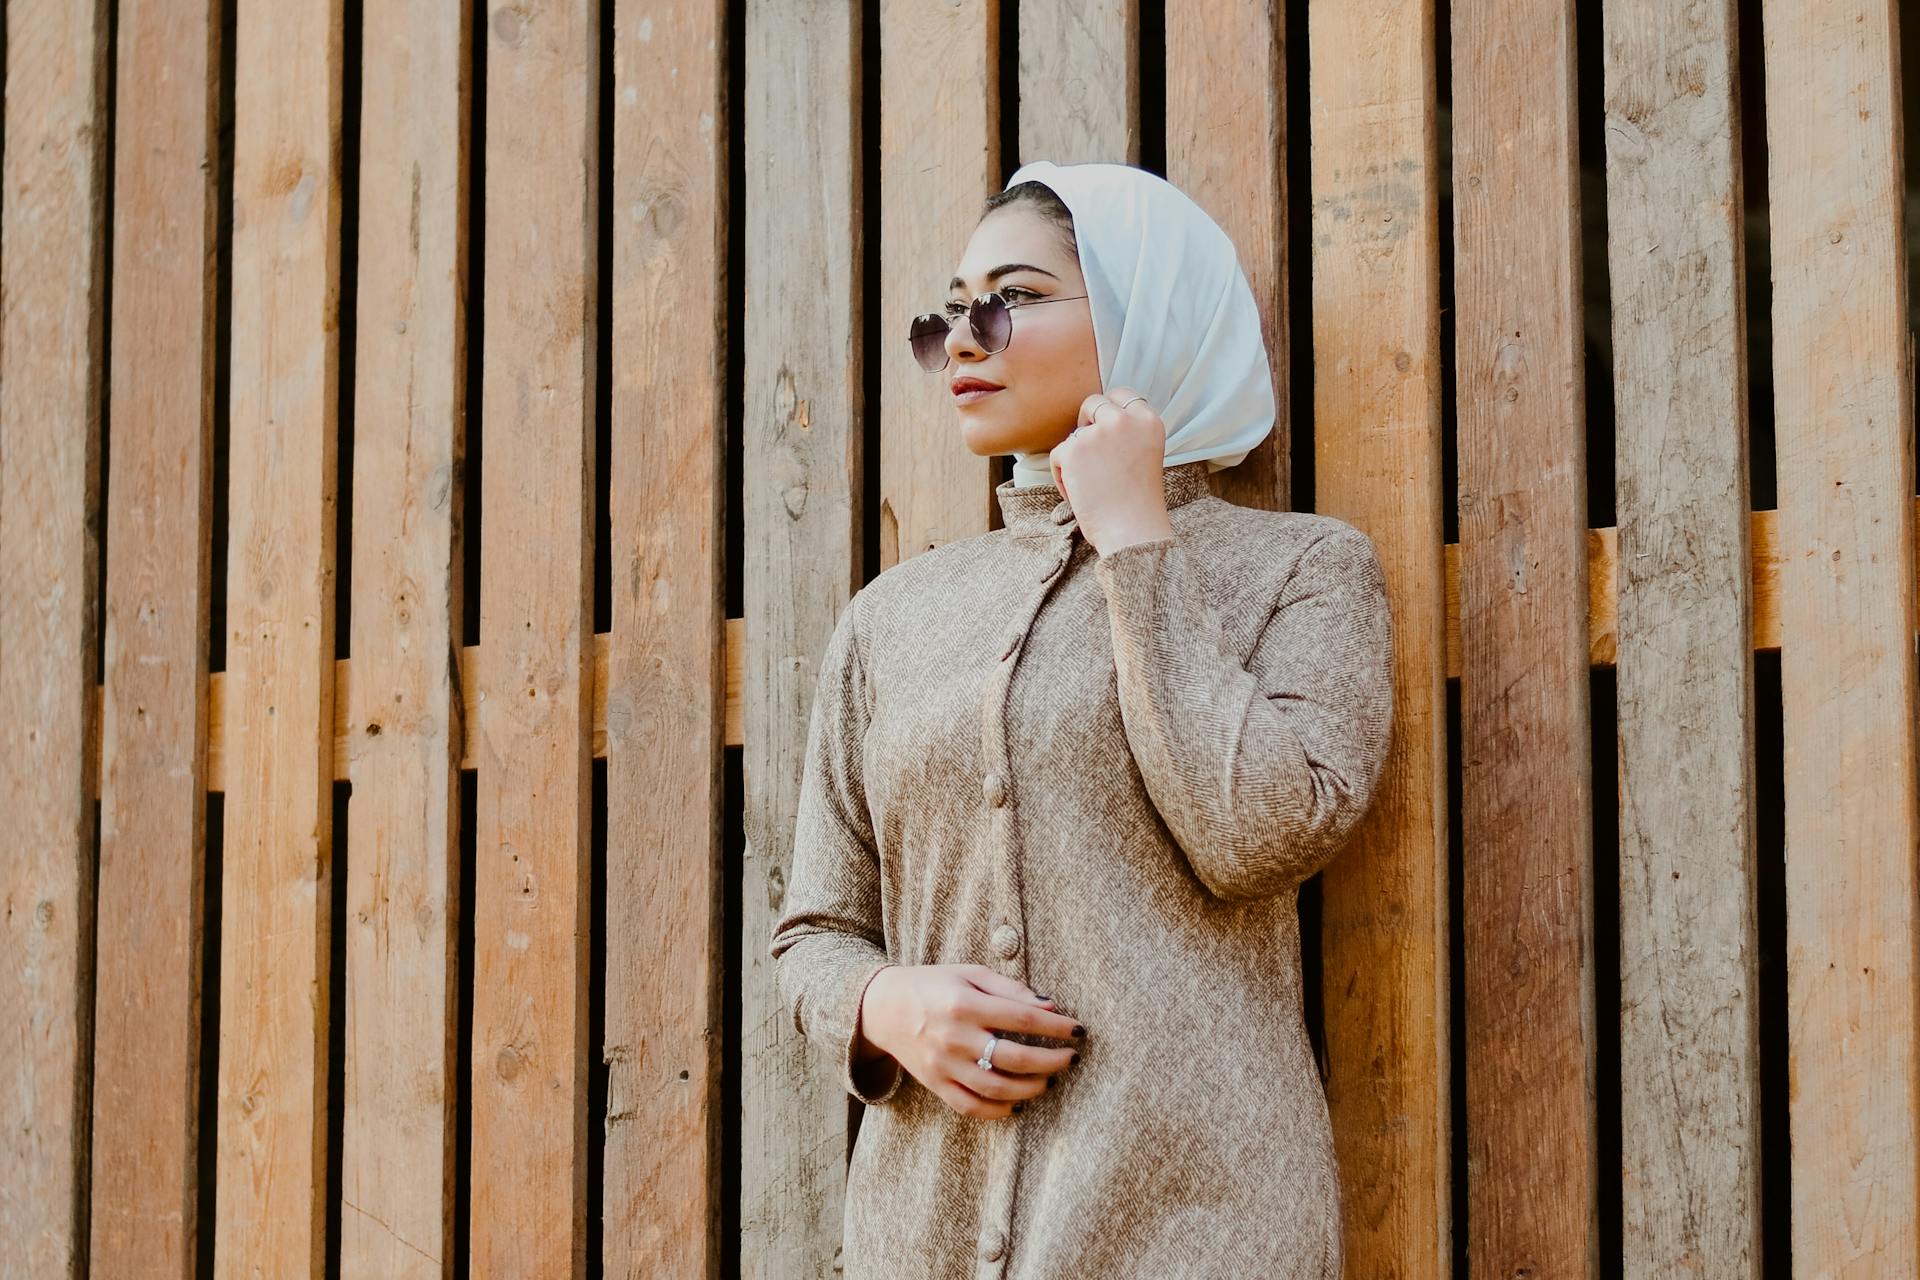 arab woman wearing sunglasses standing against wooden wall